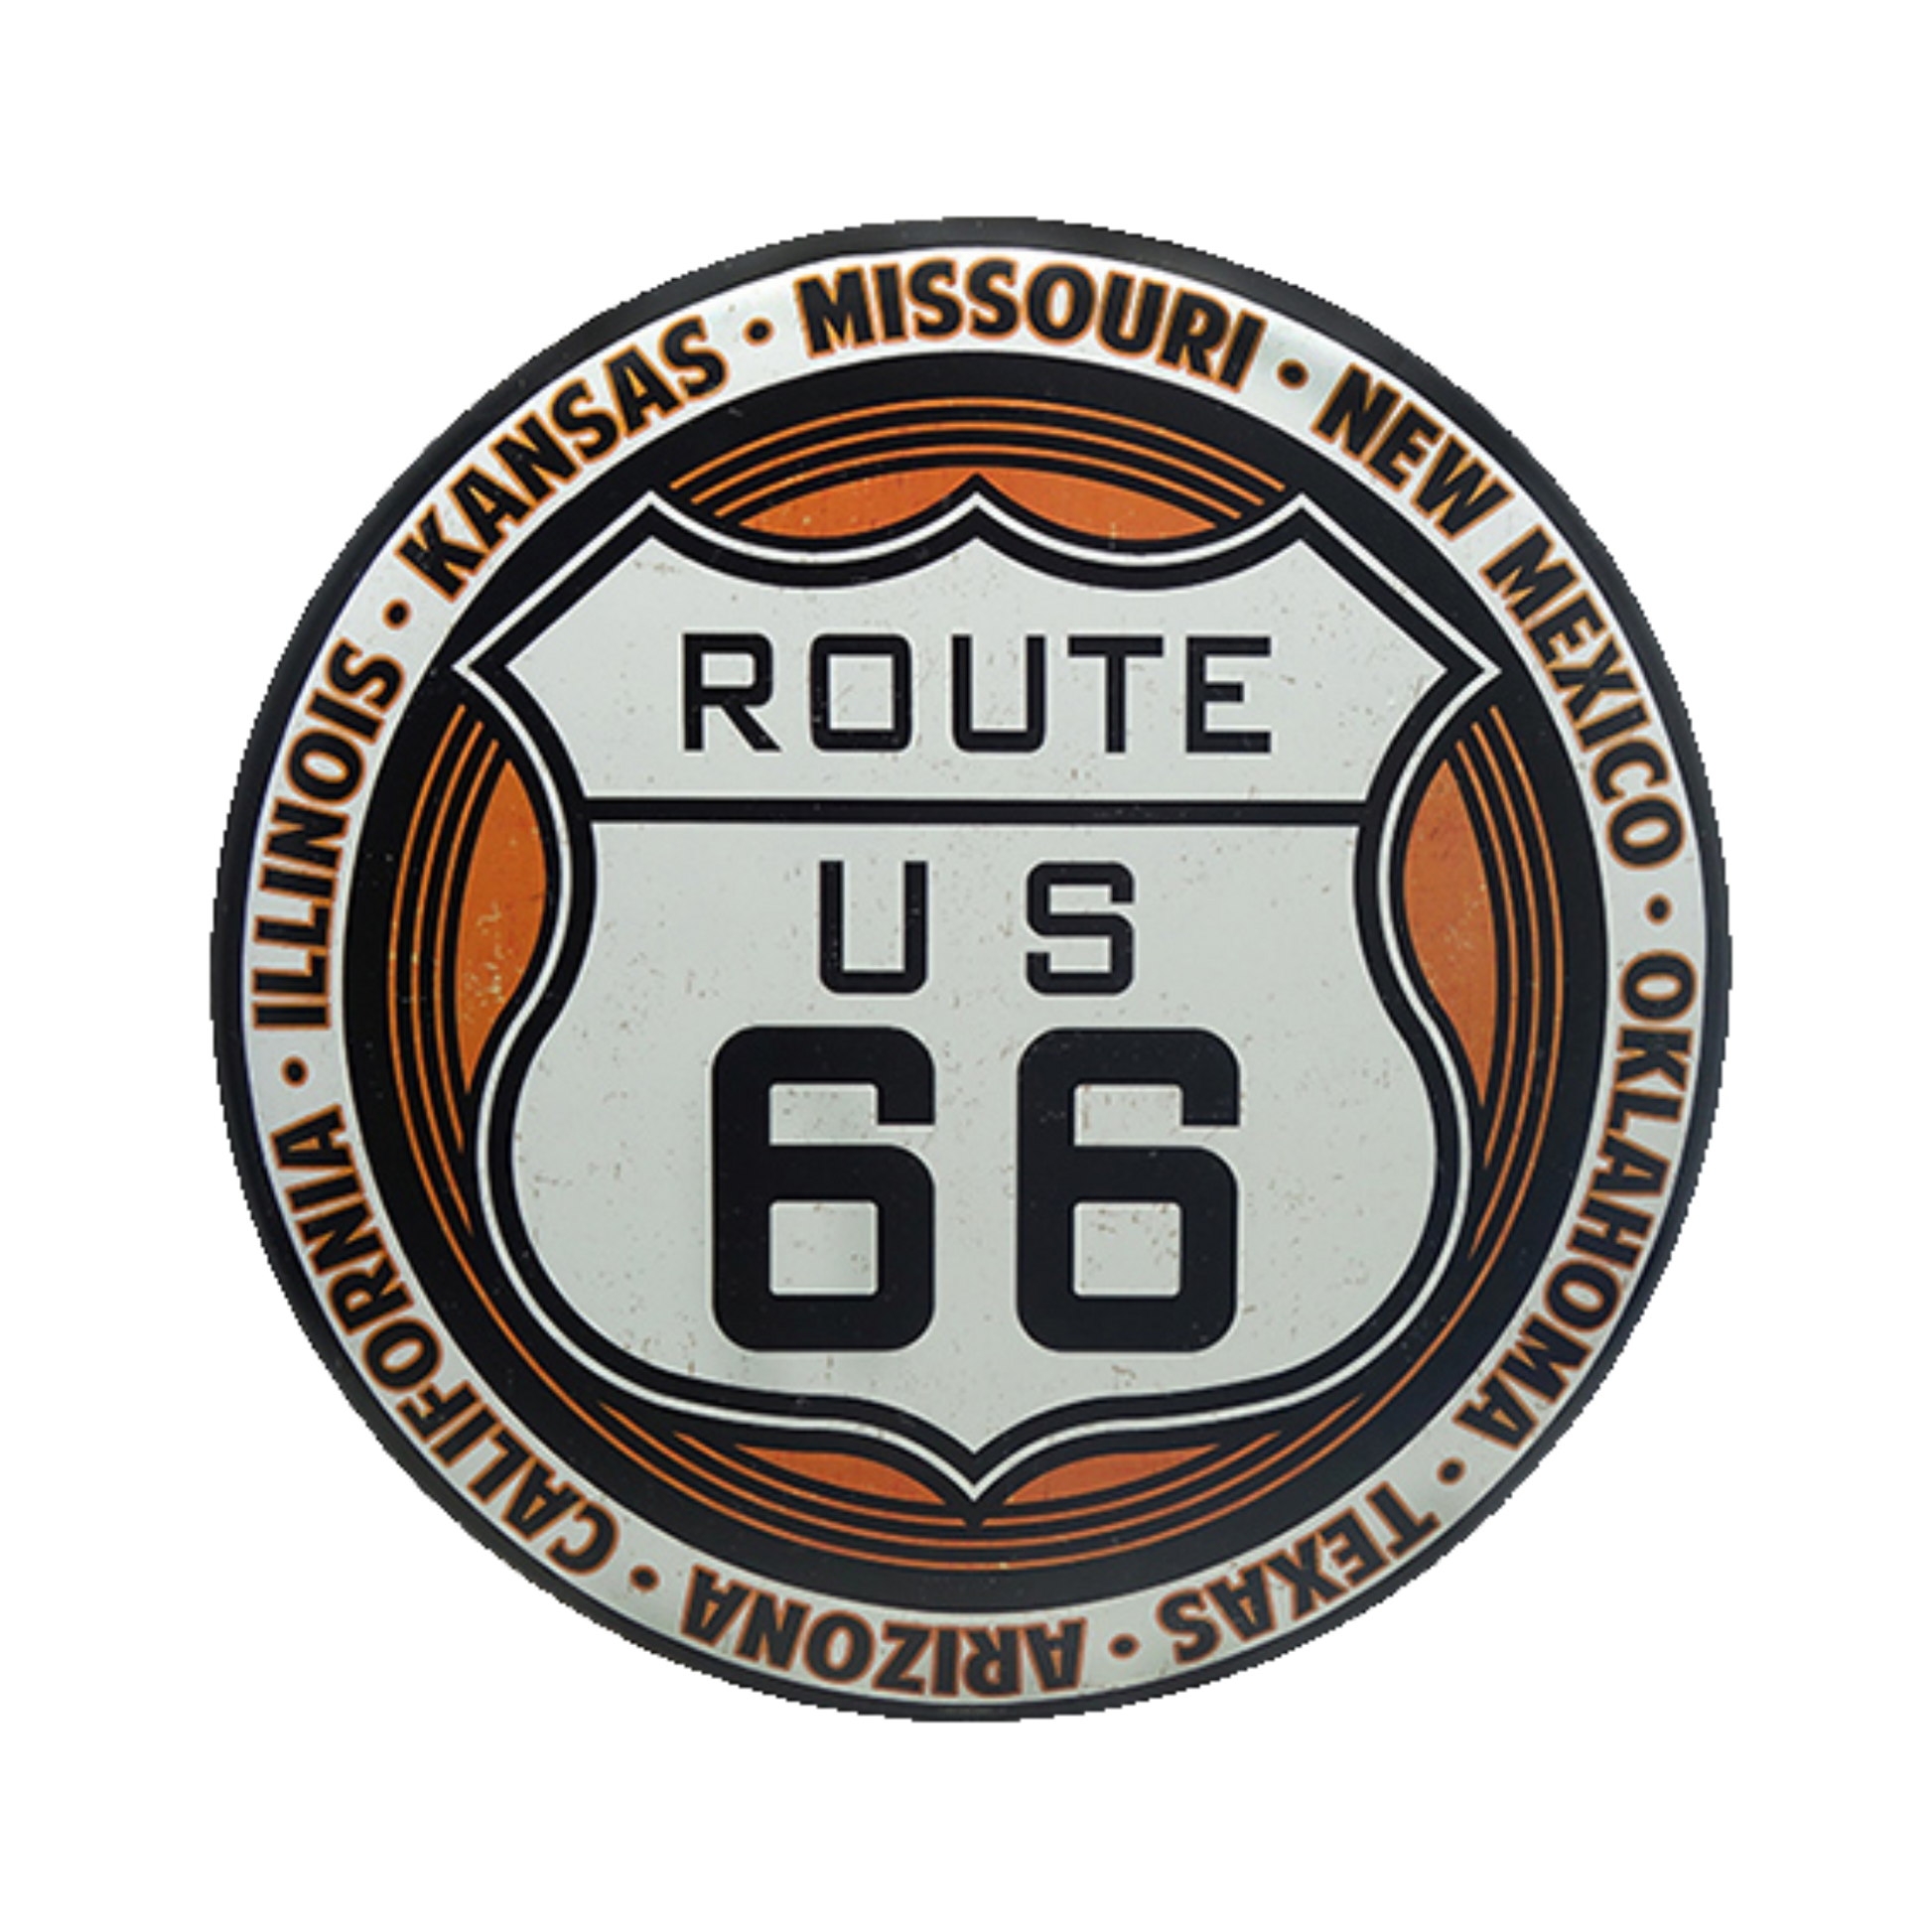 Round tin sign showcasing the iconic Route 66 logo surrounded by the names of the states it passes through.